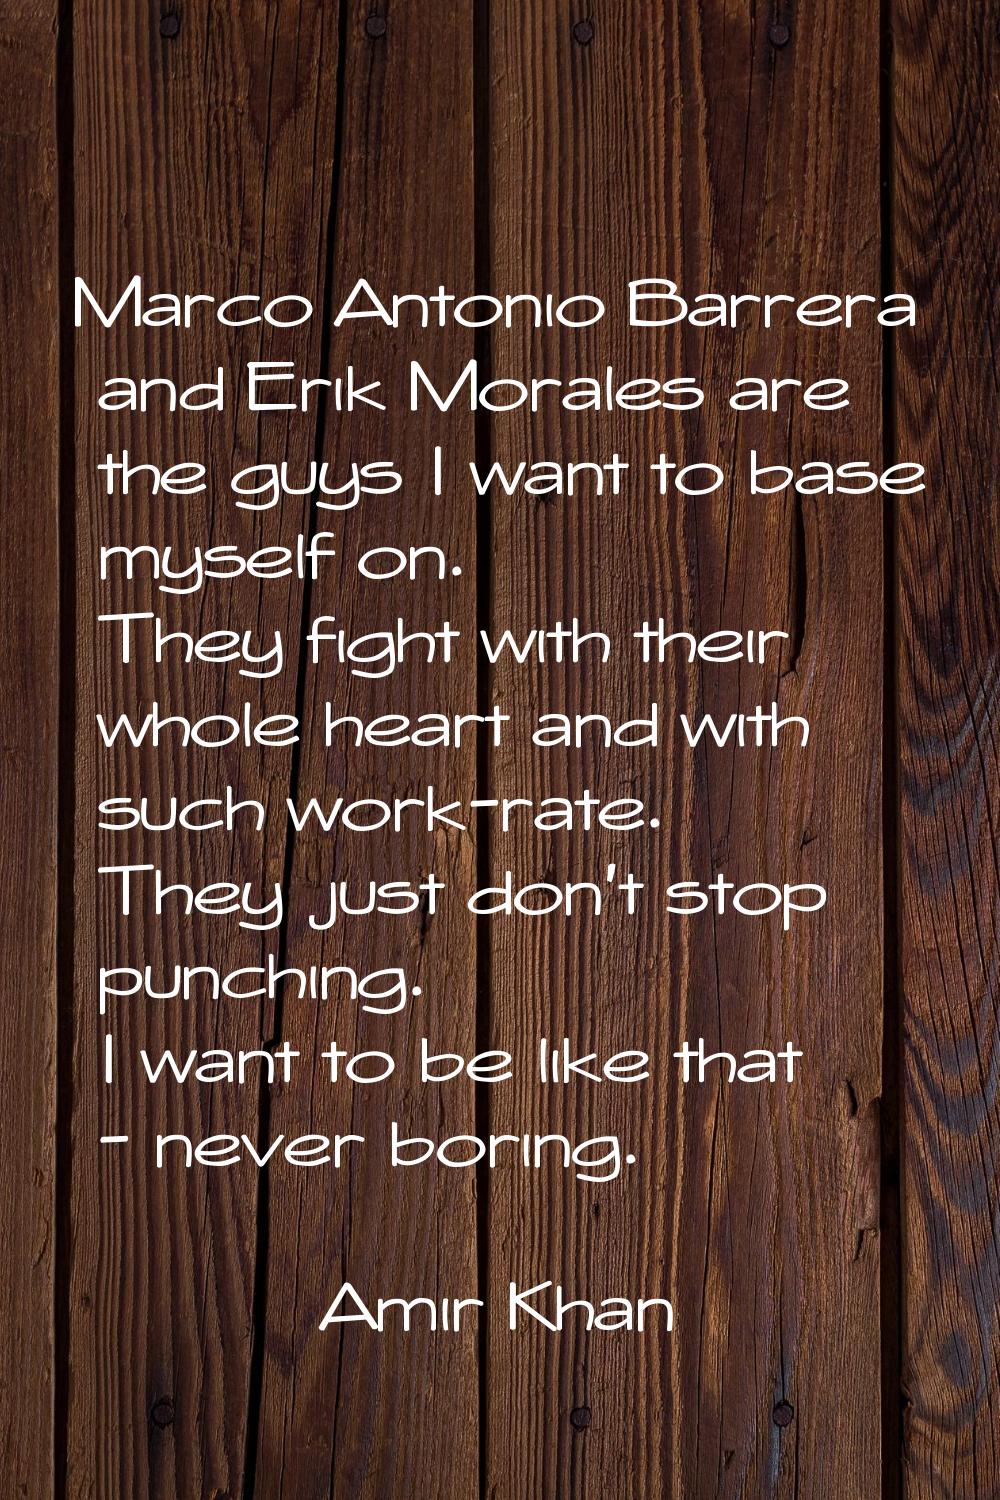 Marco Antonio Barrera and Erik Morales are the guys I want to base myself on. They fight with their